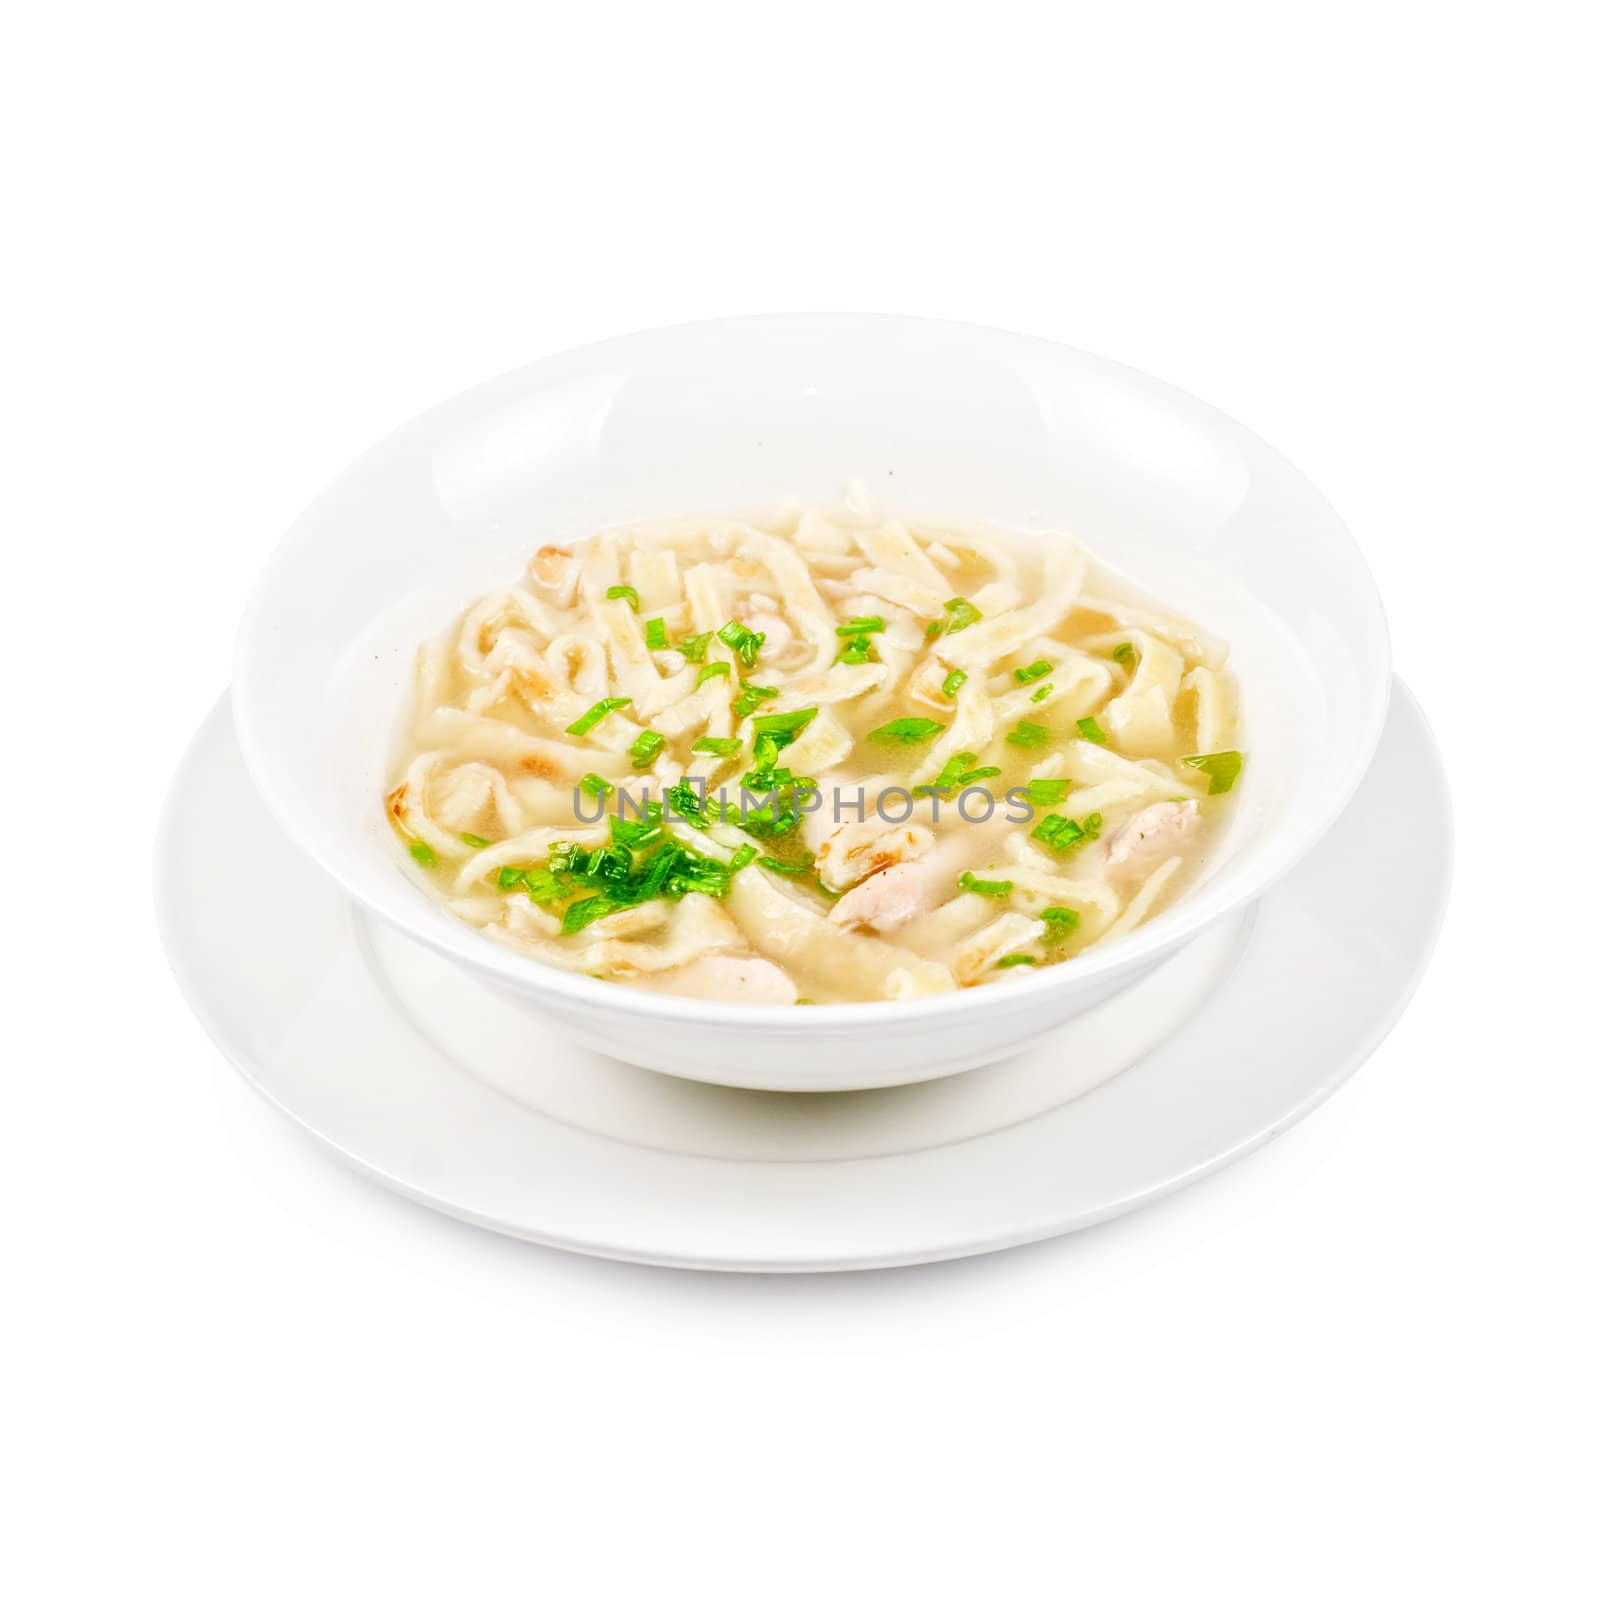 Chicken noodle soup by rusak